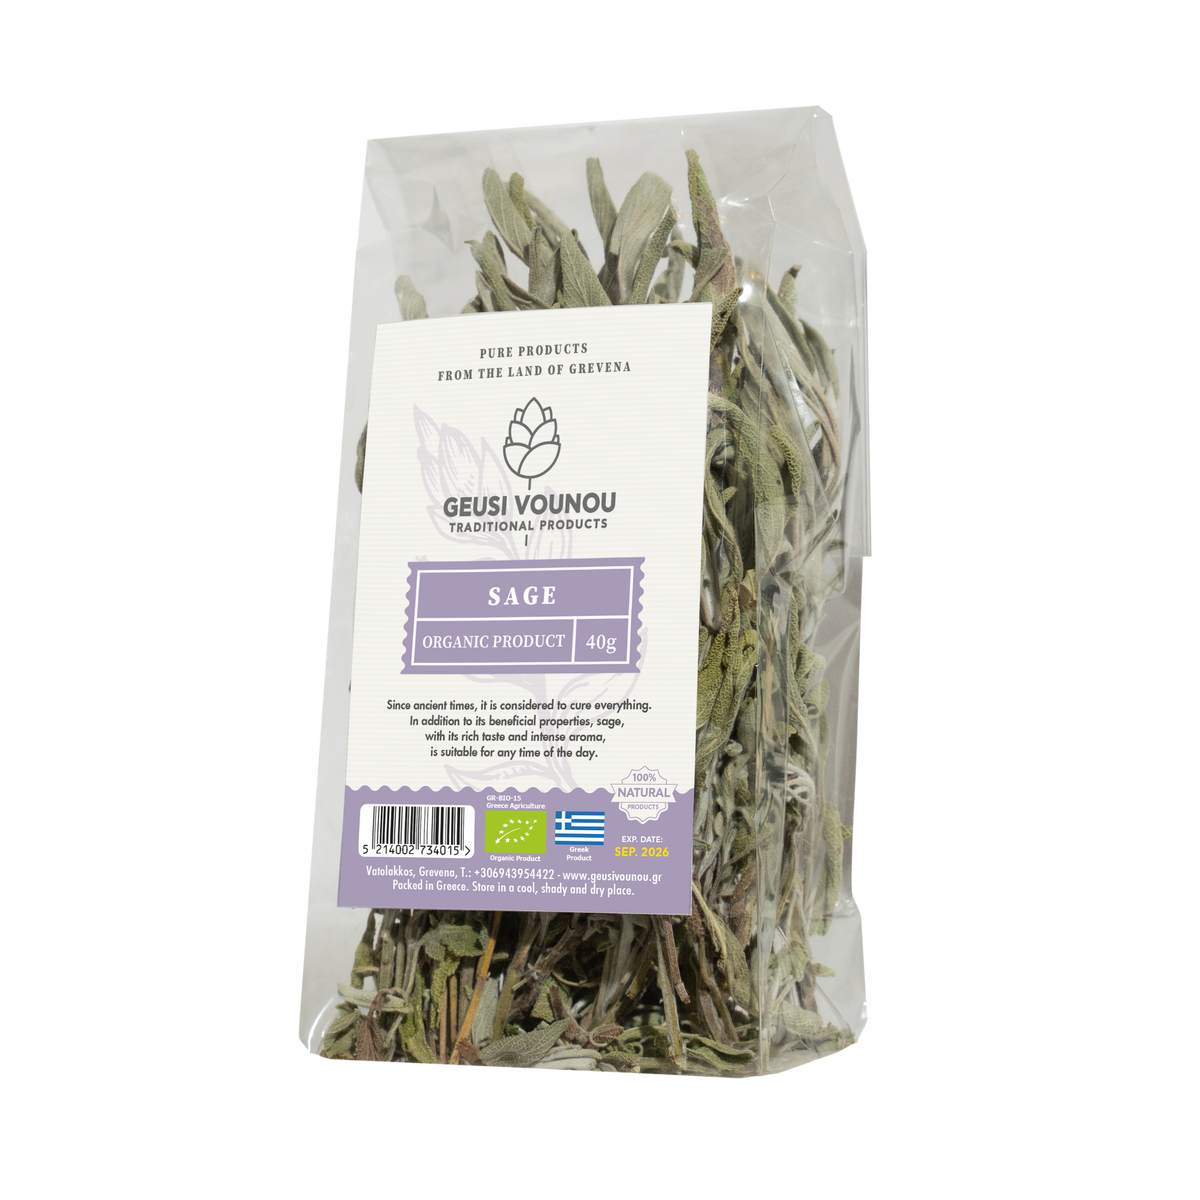 Organic Sage from Greece, 40g (whole leaf) - by Geusi Vounou